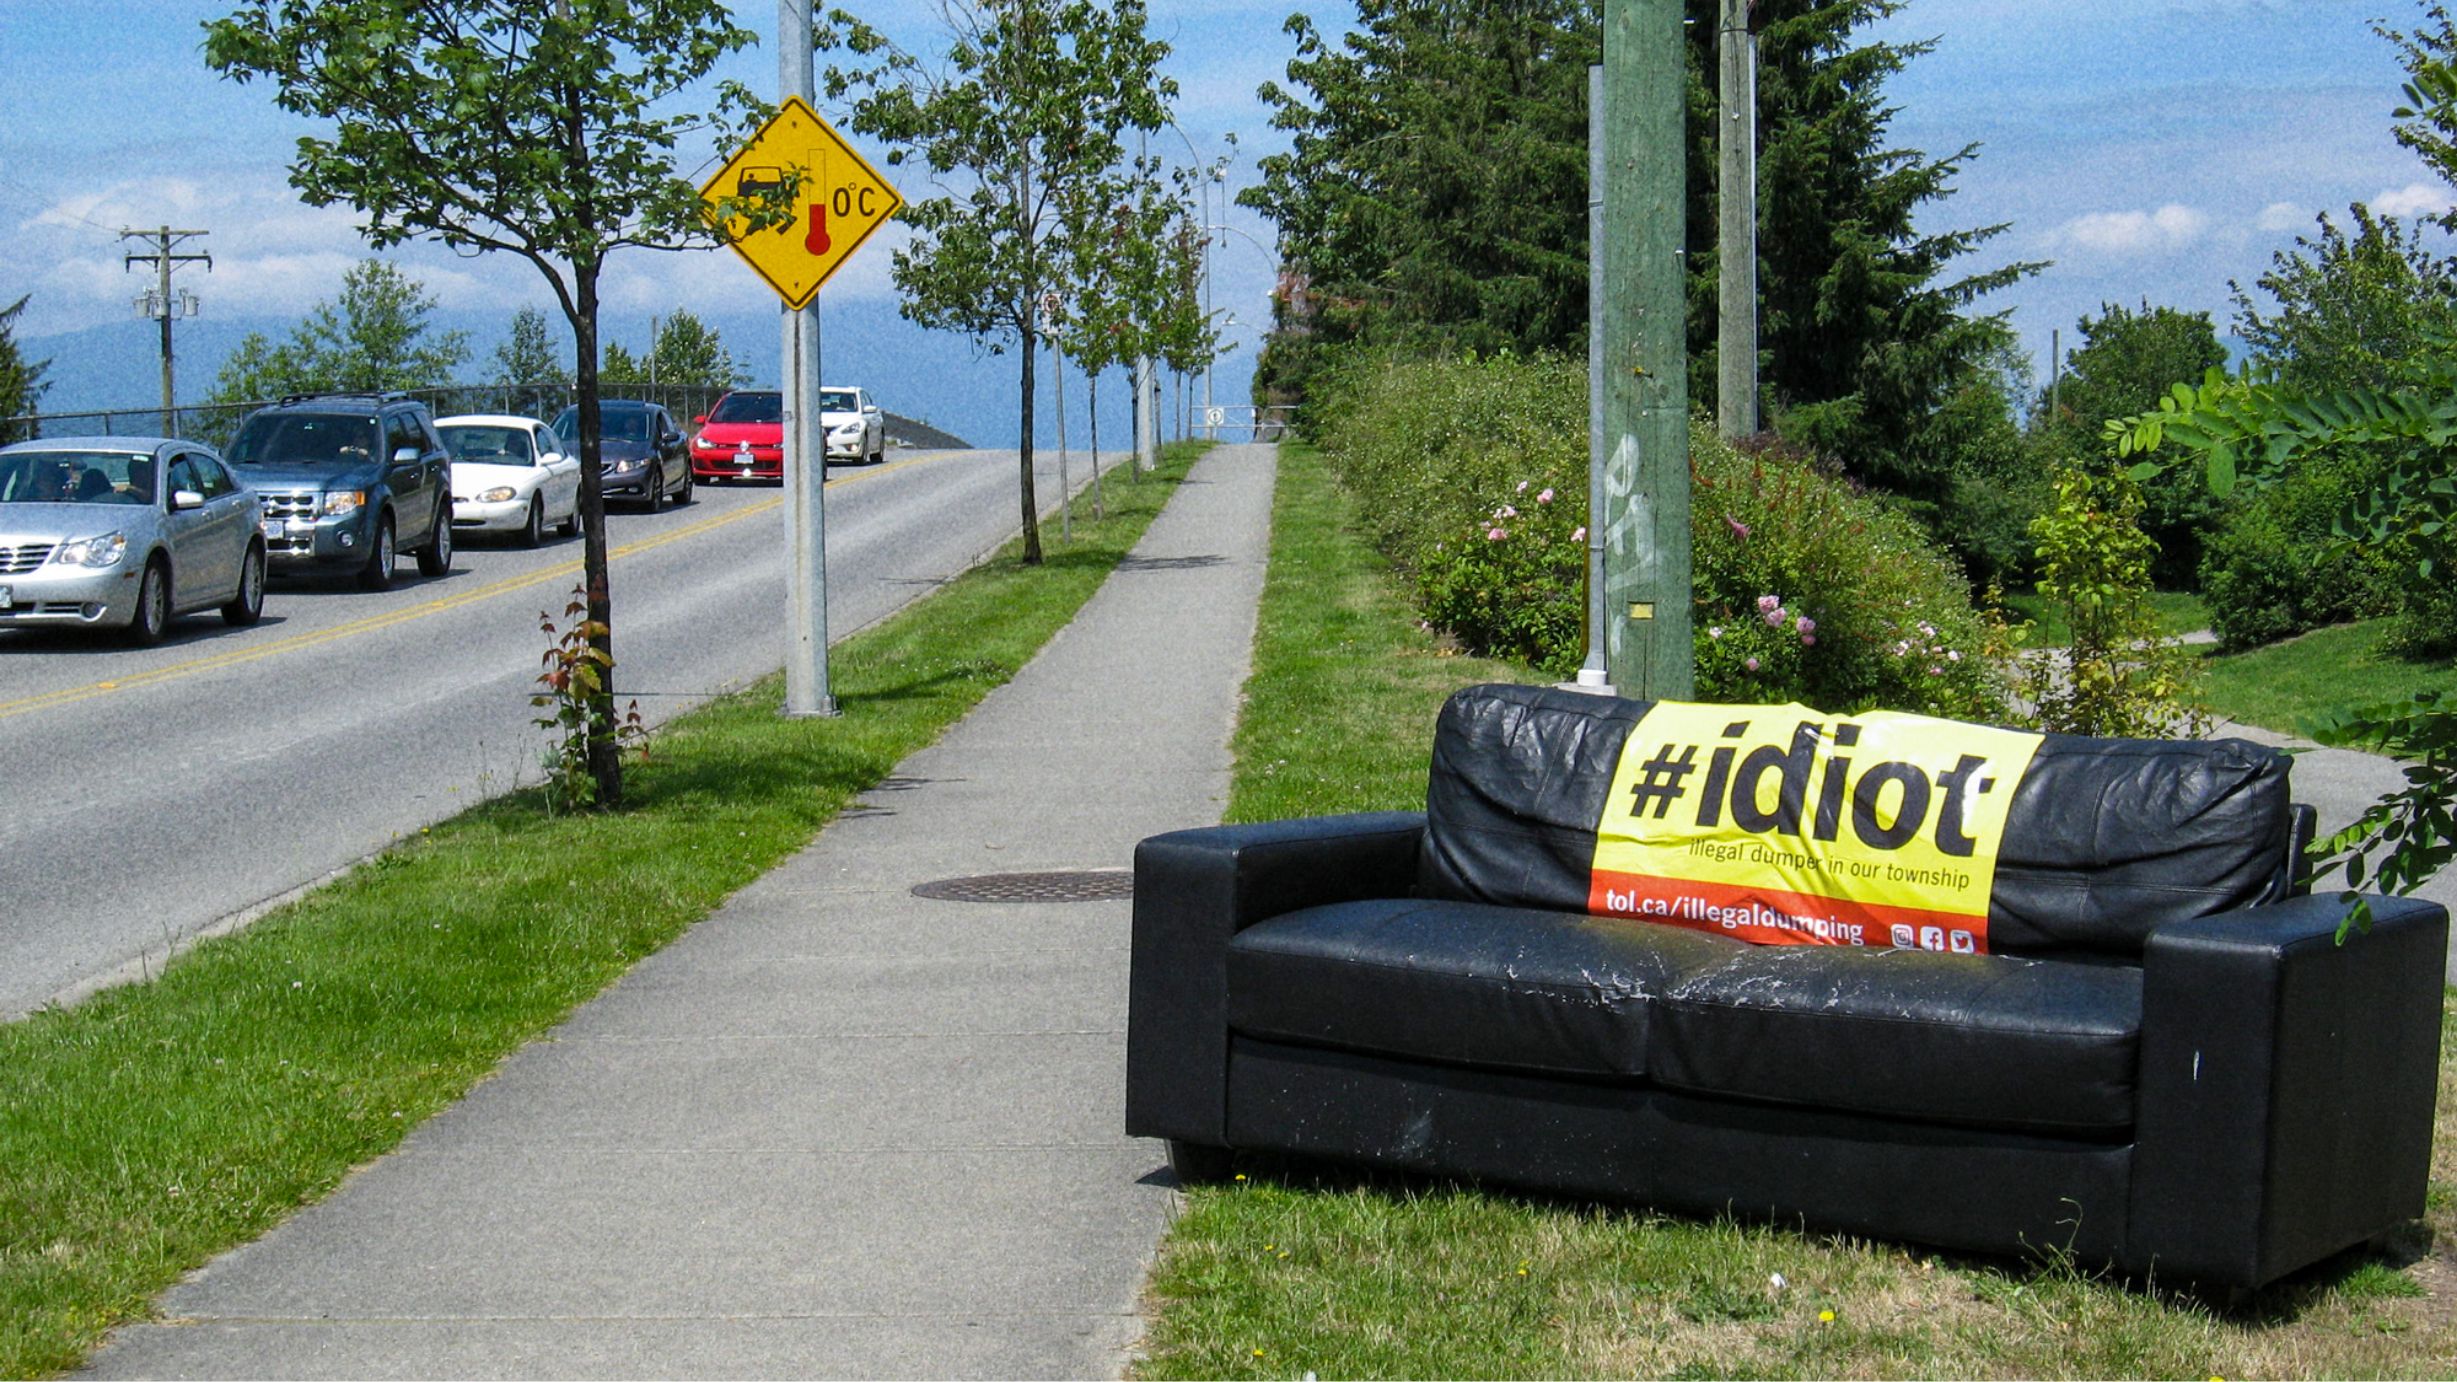 IDIOT: Illegal Dumper in Our Township Sticker on abandonded couch